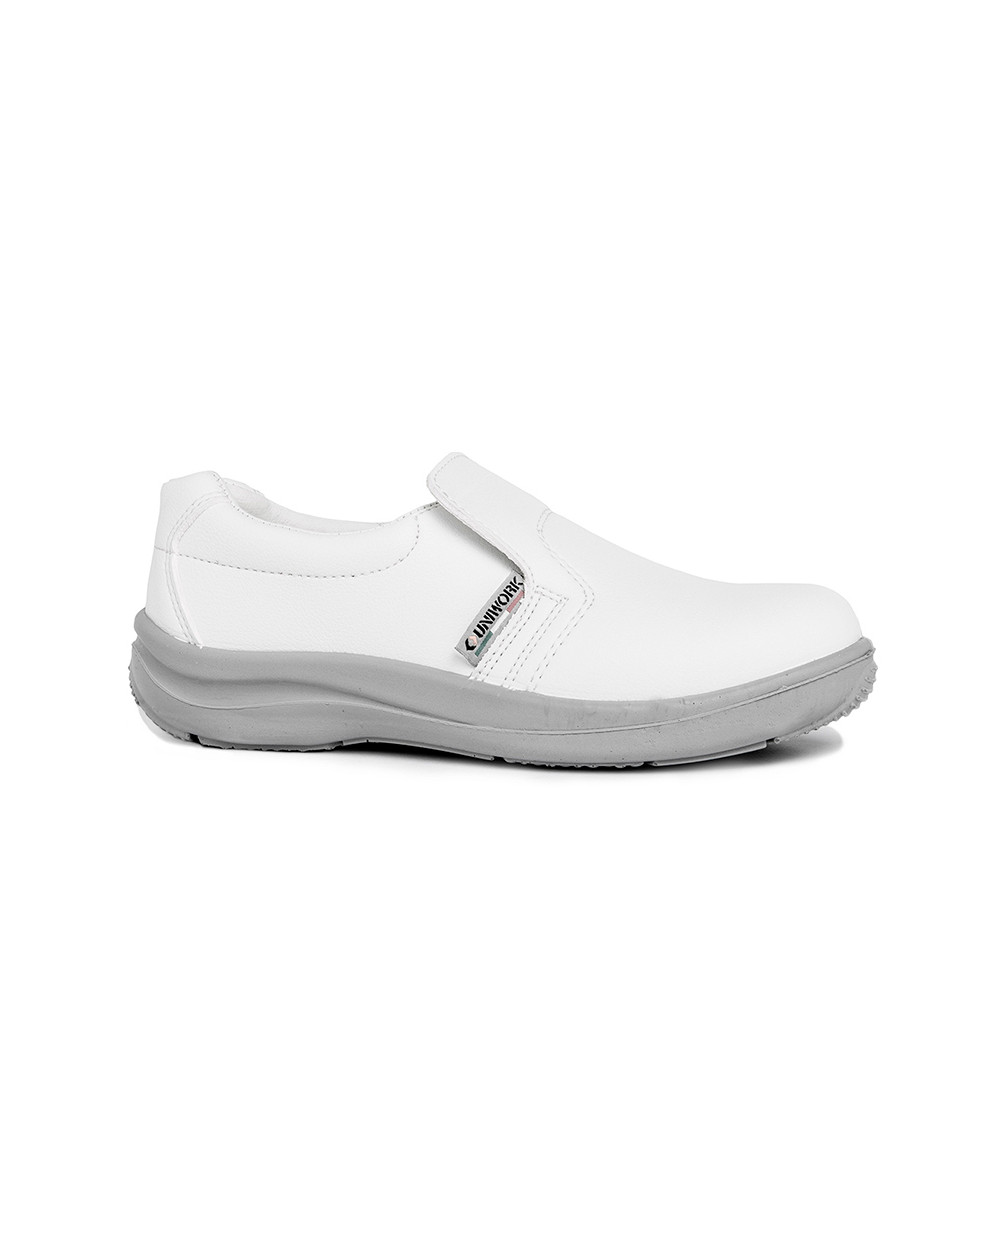 CHAUSSURES SECURITE CUISINE/AGRO CEL49 FEMME BASSE BLANCHE S2